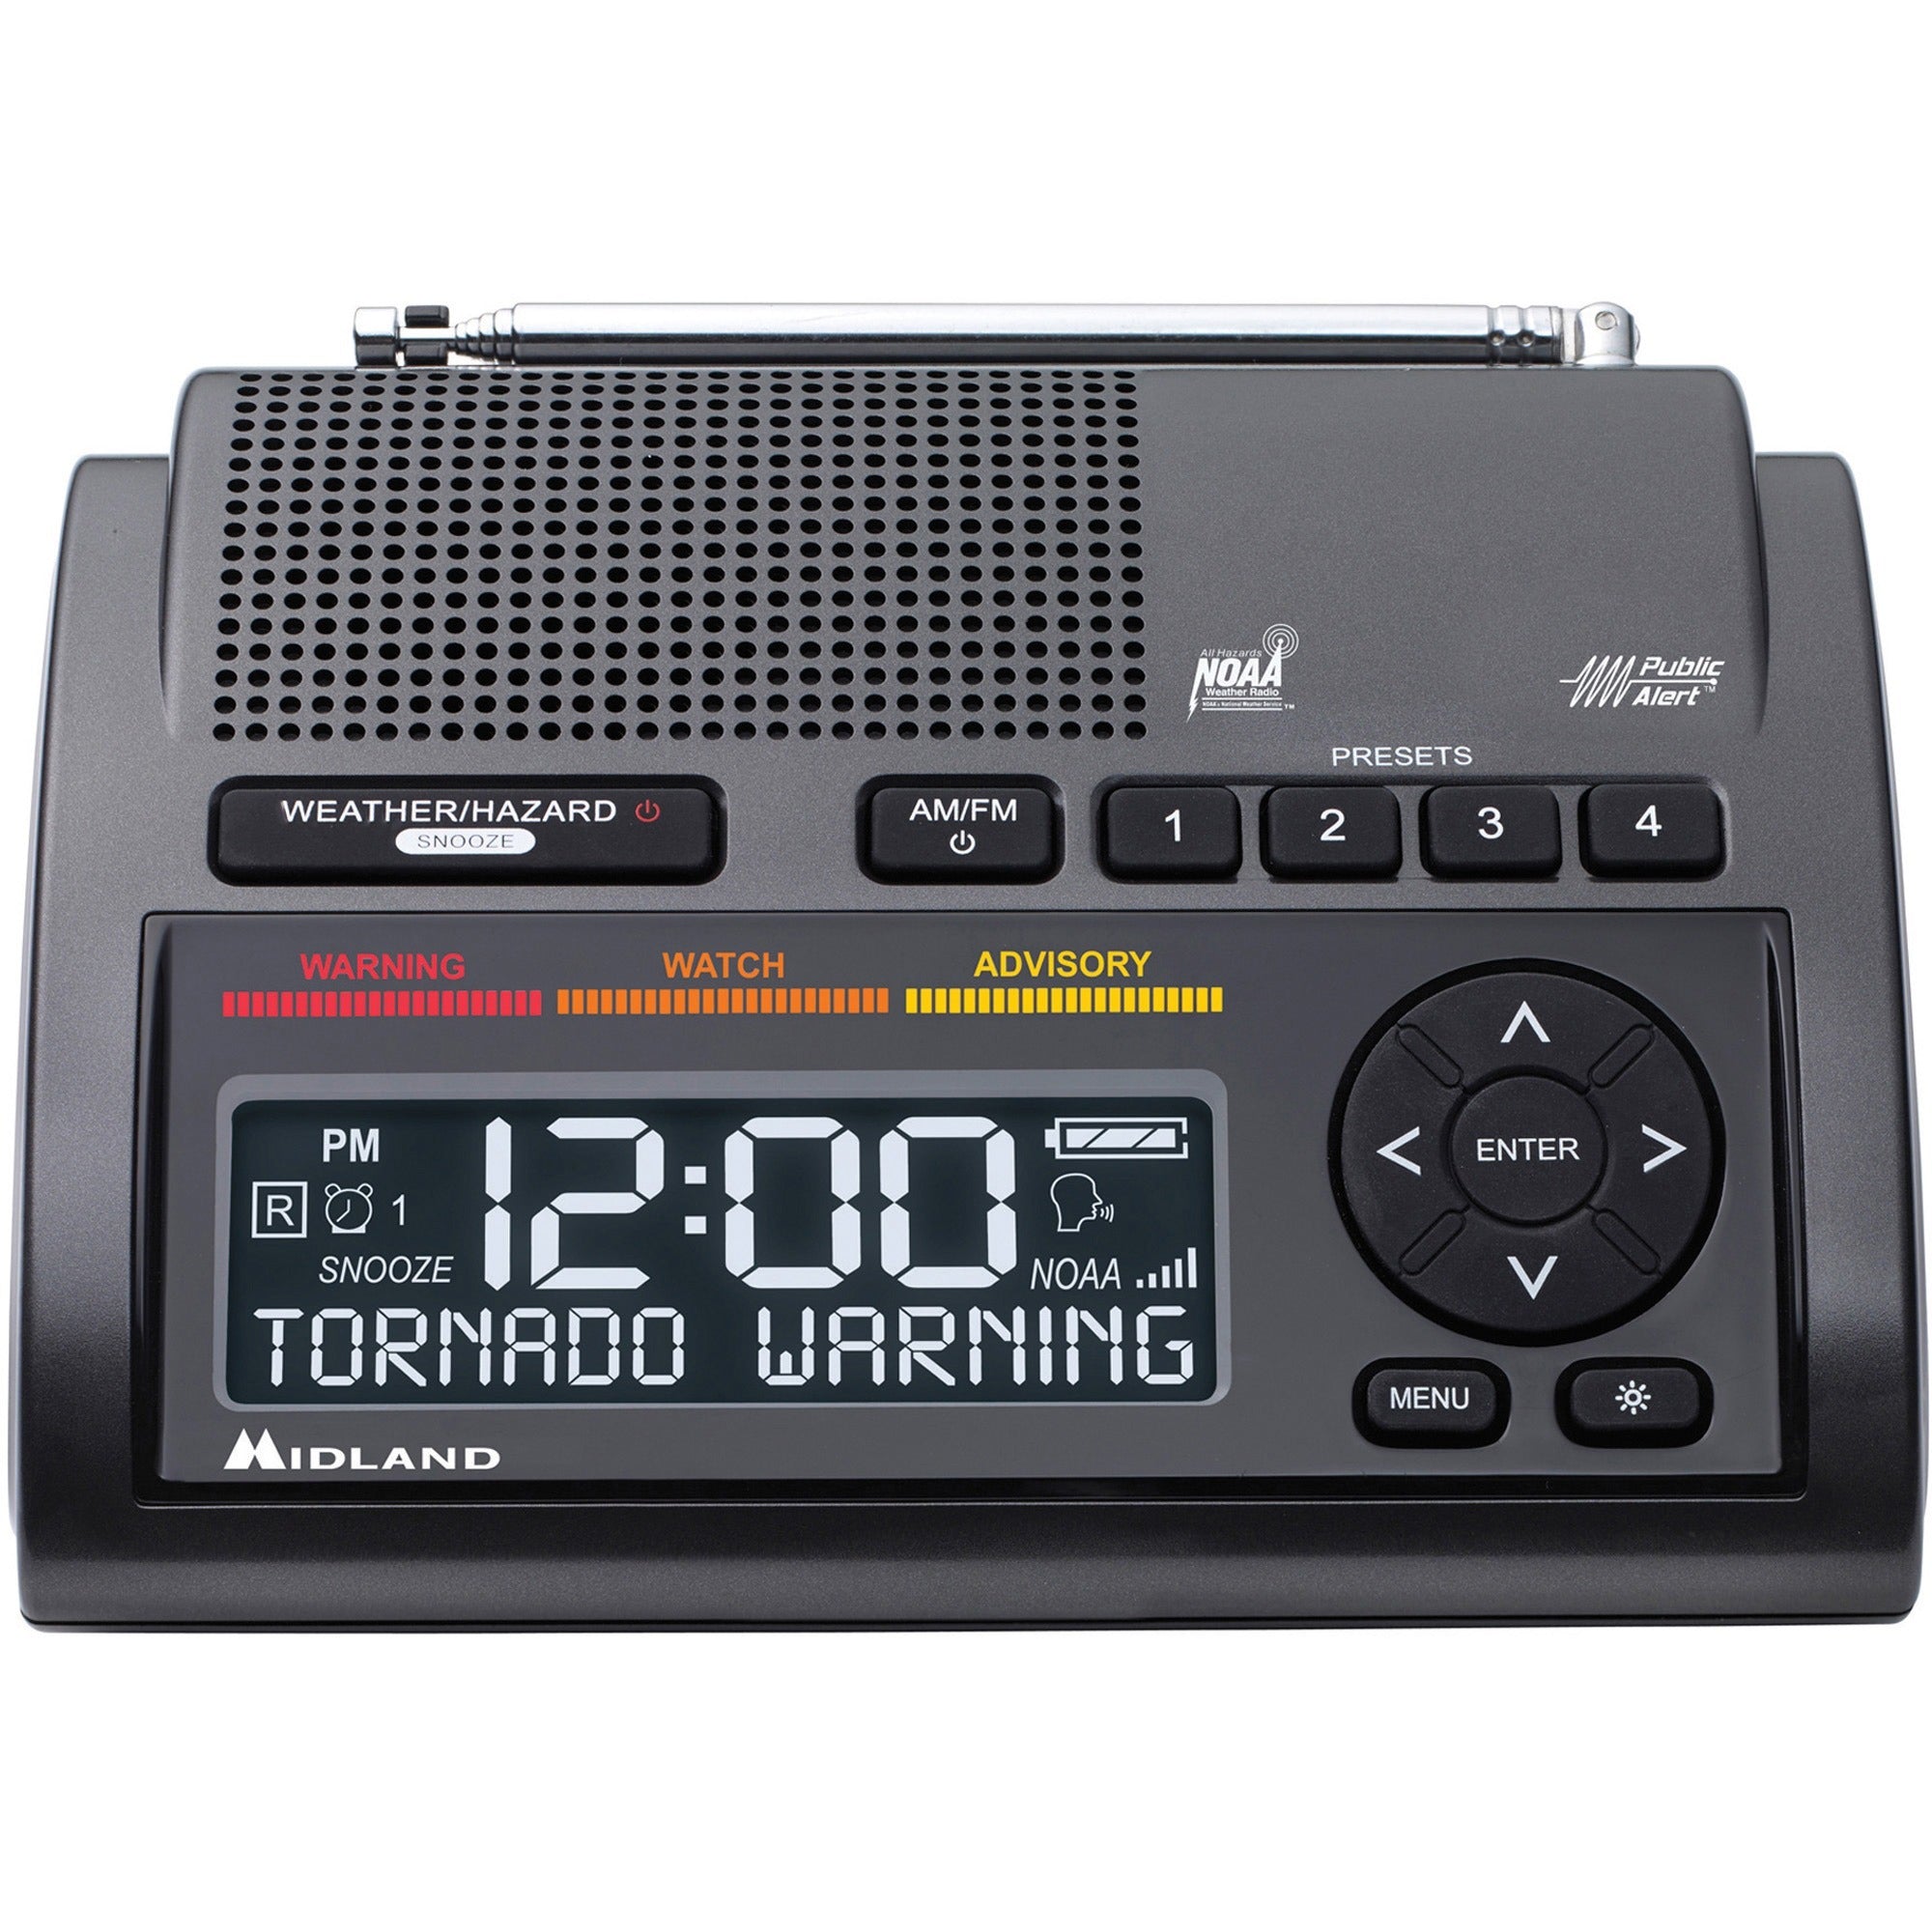 midland-wr400-emergency-alert-weather-radio-with-noaa-all-hazard-weather-disaster-am-fm-specific-area-message-encoding-same7-weather-portable_mrowr400 - 1